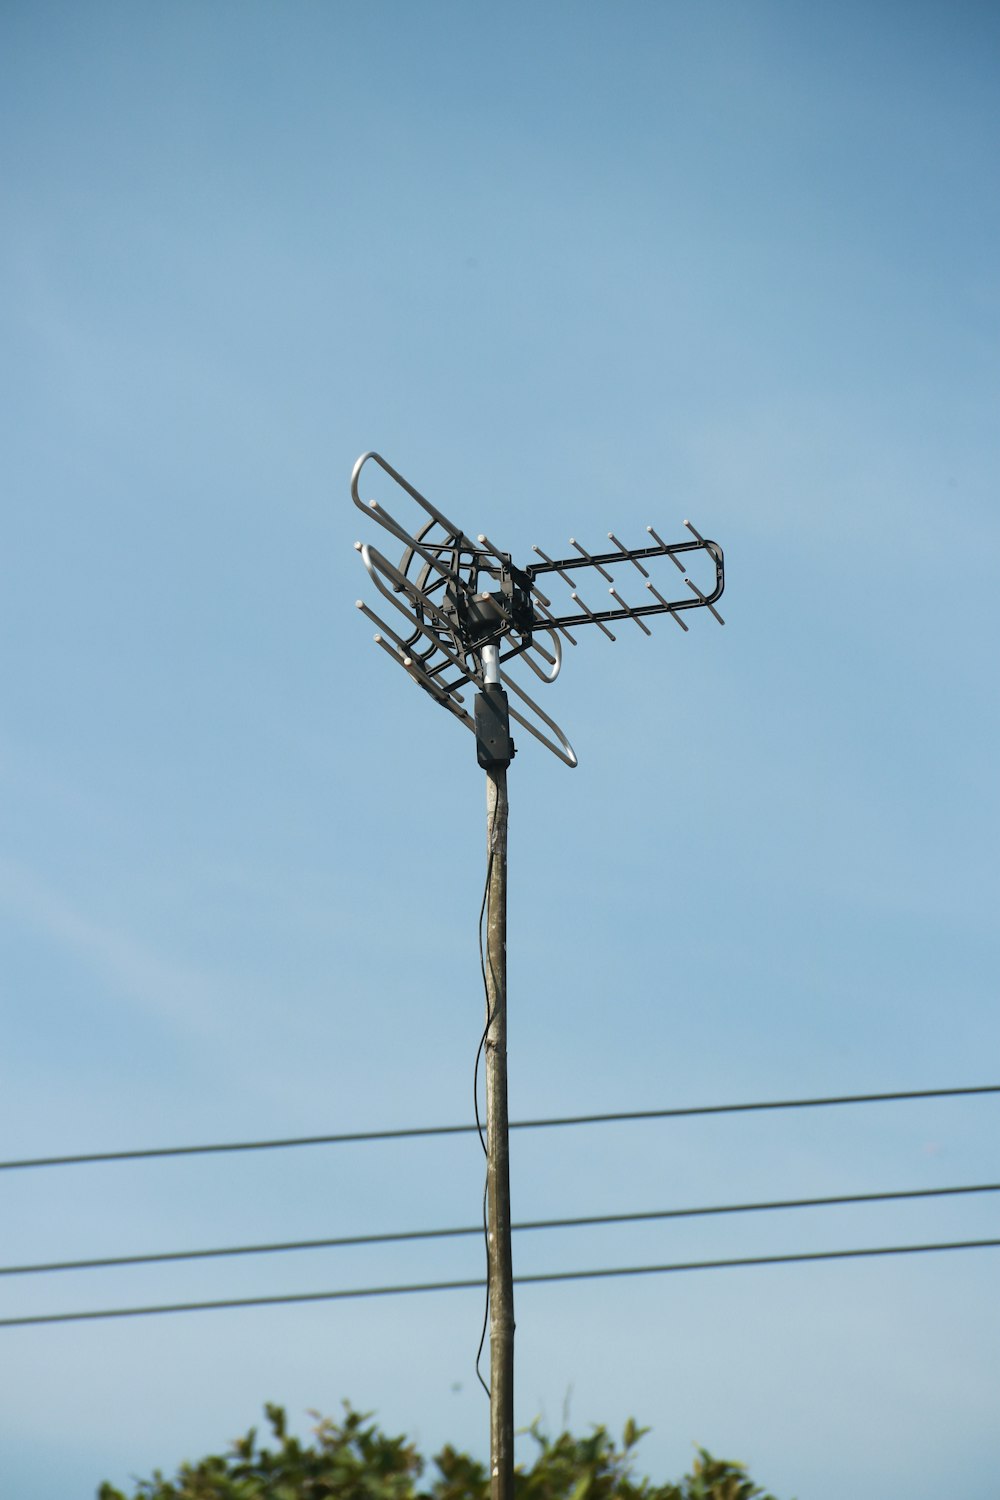 a television antenna on top of a pole